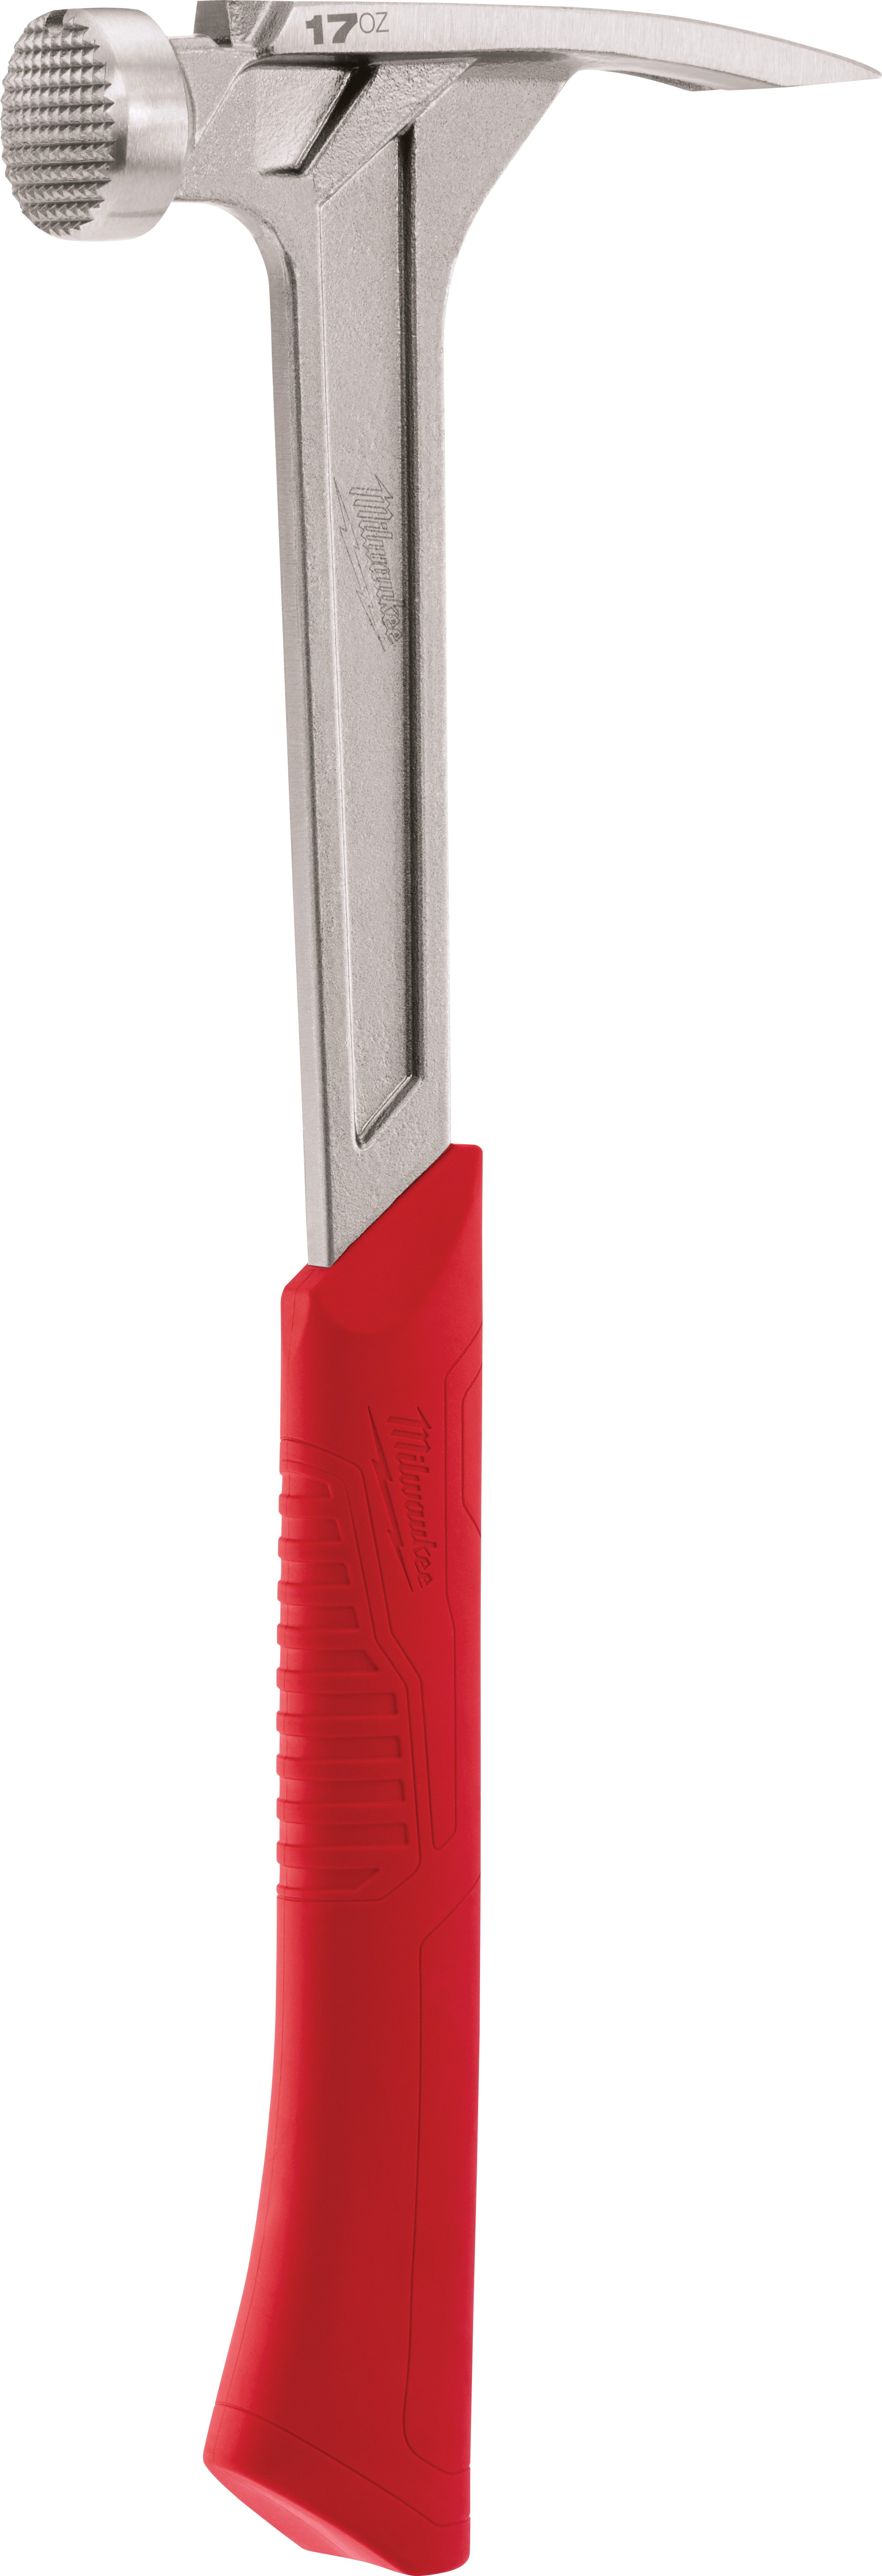 48-22-9016 045242486113 The Milwaukee® 17 oz milled face hammer is designed from the ground-up to address common user frustrations with hammers currently available on the market, providing superior driving performance with up to 10X less peak vibration. Constructed with a steel I-Beam handle, the new hammer is designed to withstand the harshest jobsite use and a SHOCKWAVE™ grip provides best-in-class grip durability and vibration reduction. For added user benefit, the hammer features an anti-ring claw design which reduces noise and ringing when striking hardened objects.